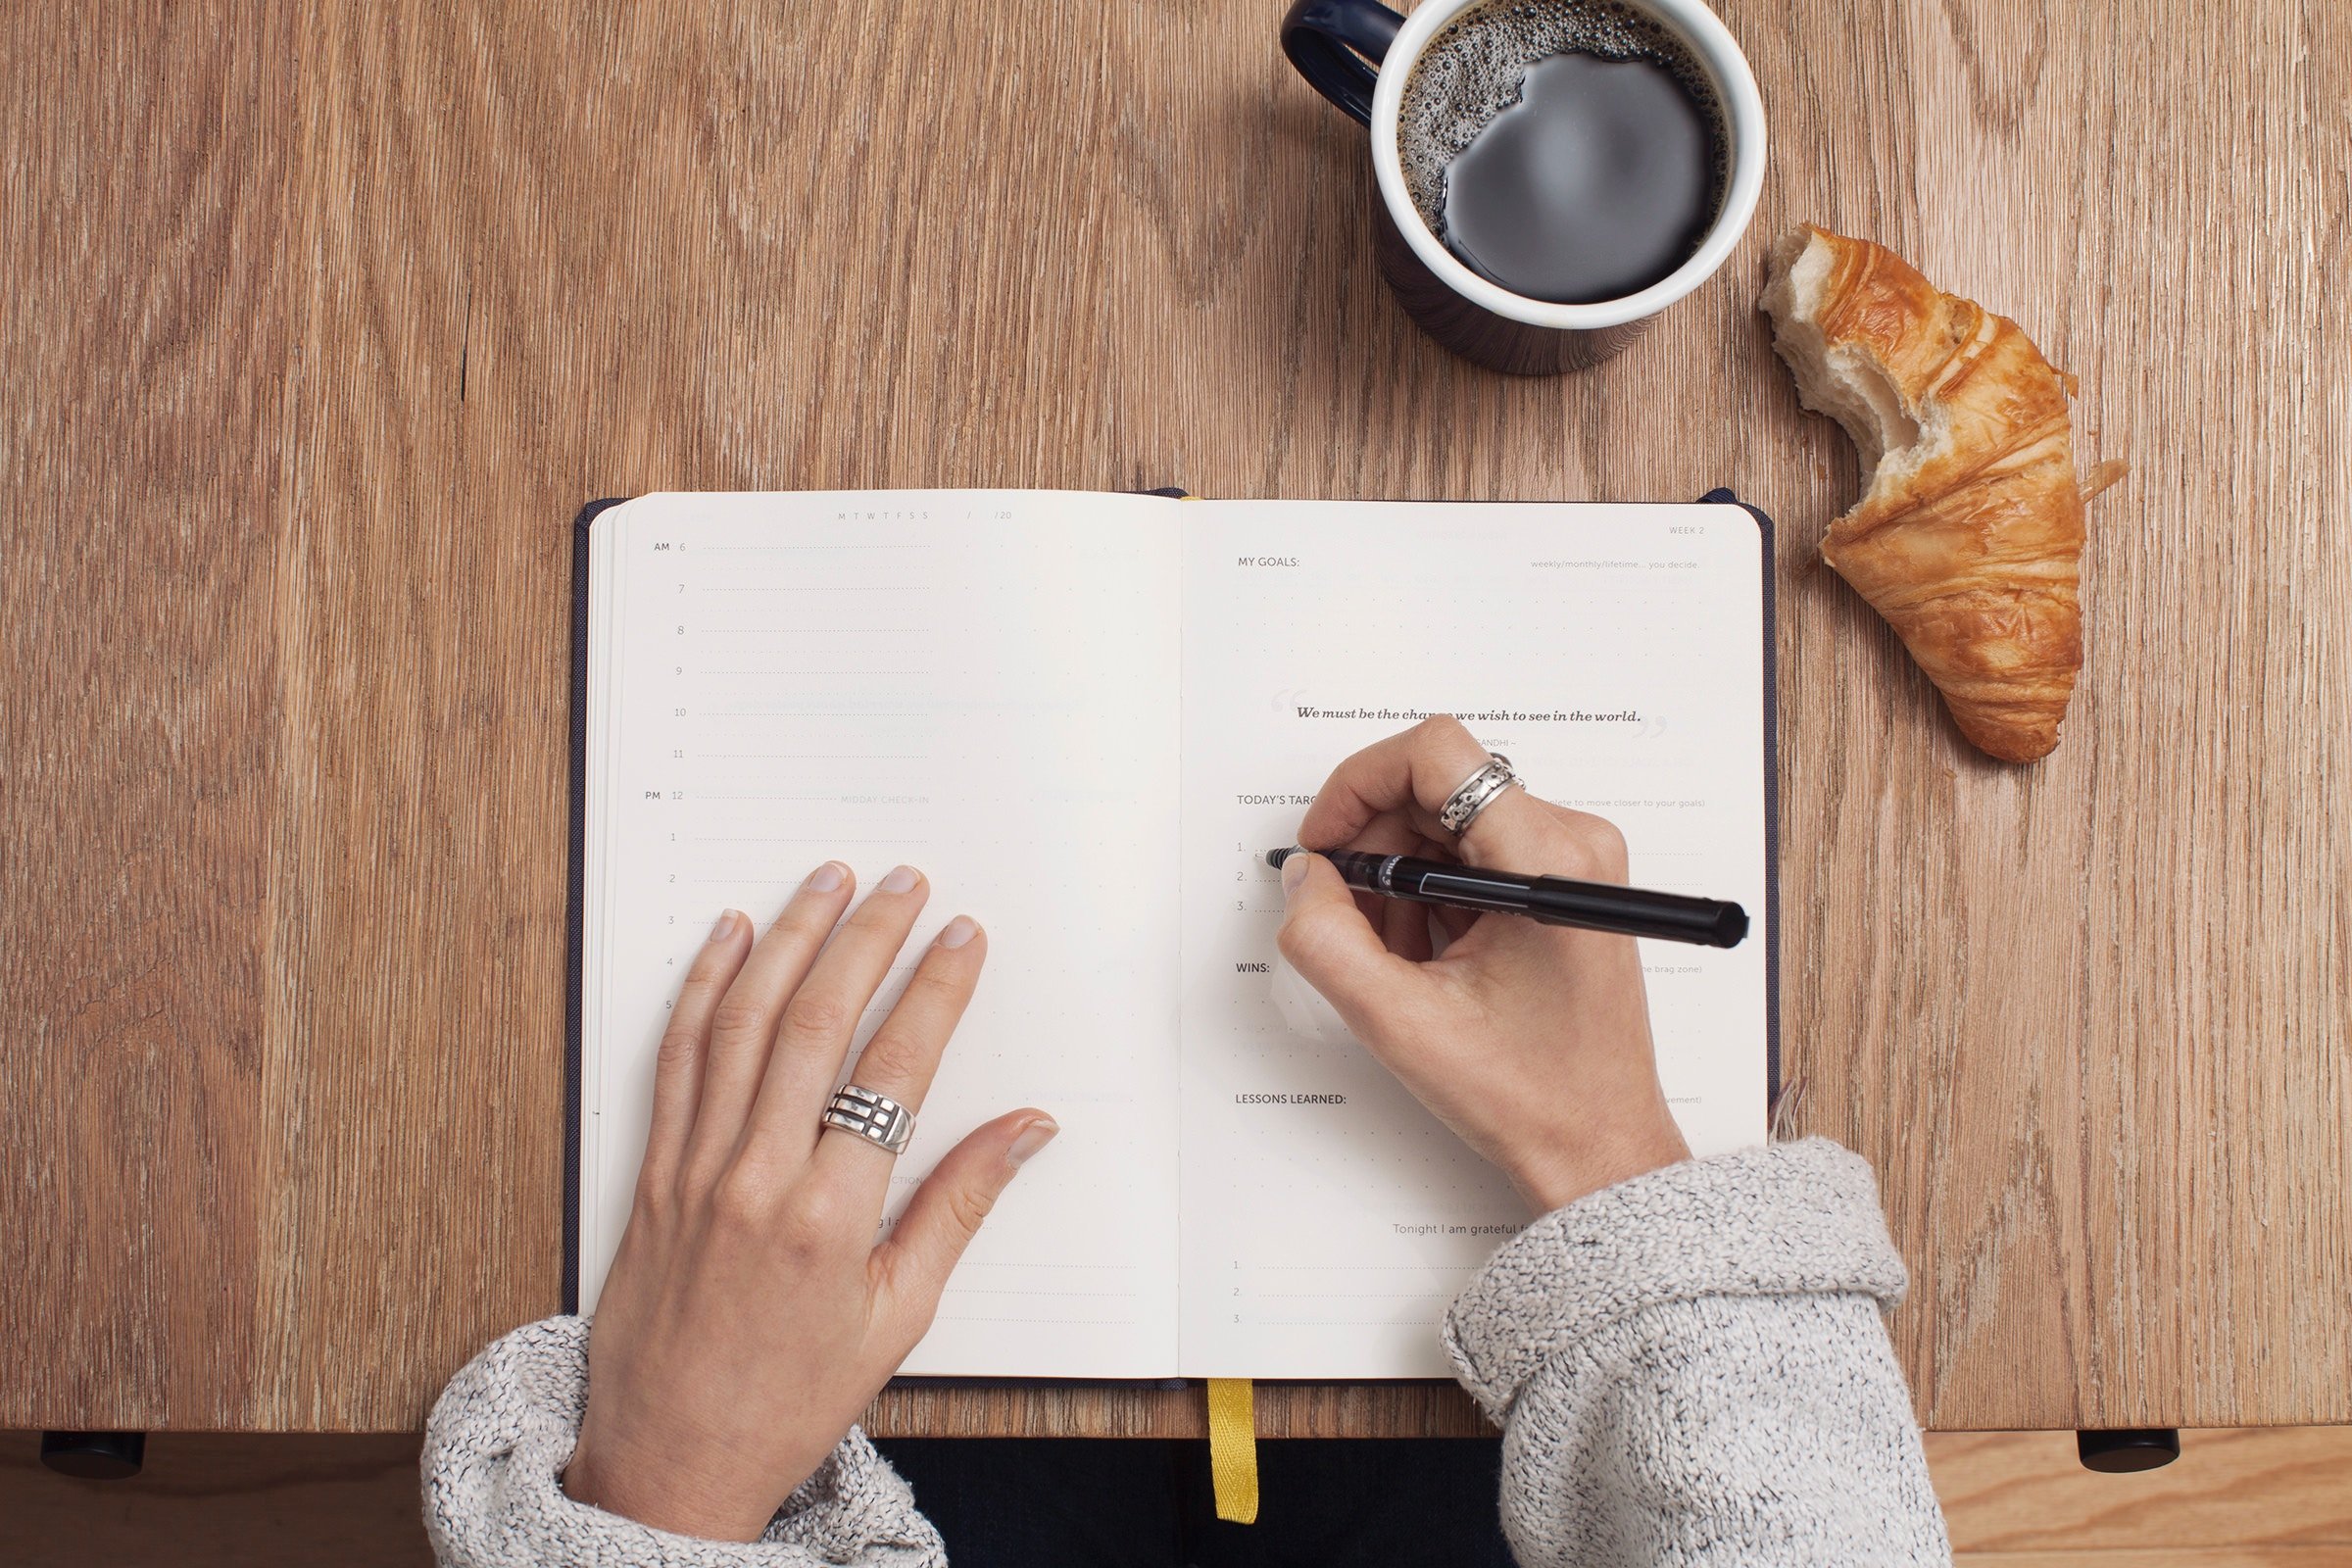 Image of coffee cup, croissant with a bite taken out of it, a planner, and a woman with a pen beginning to write in the planner.